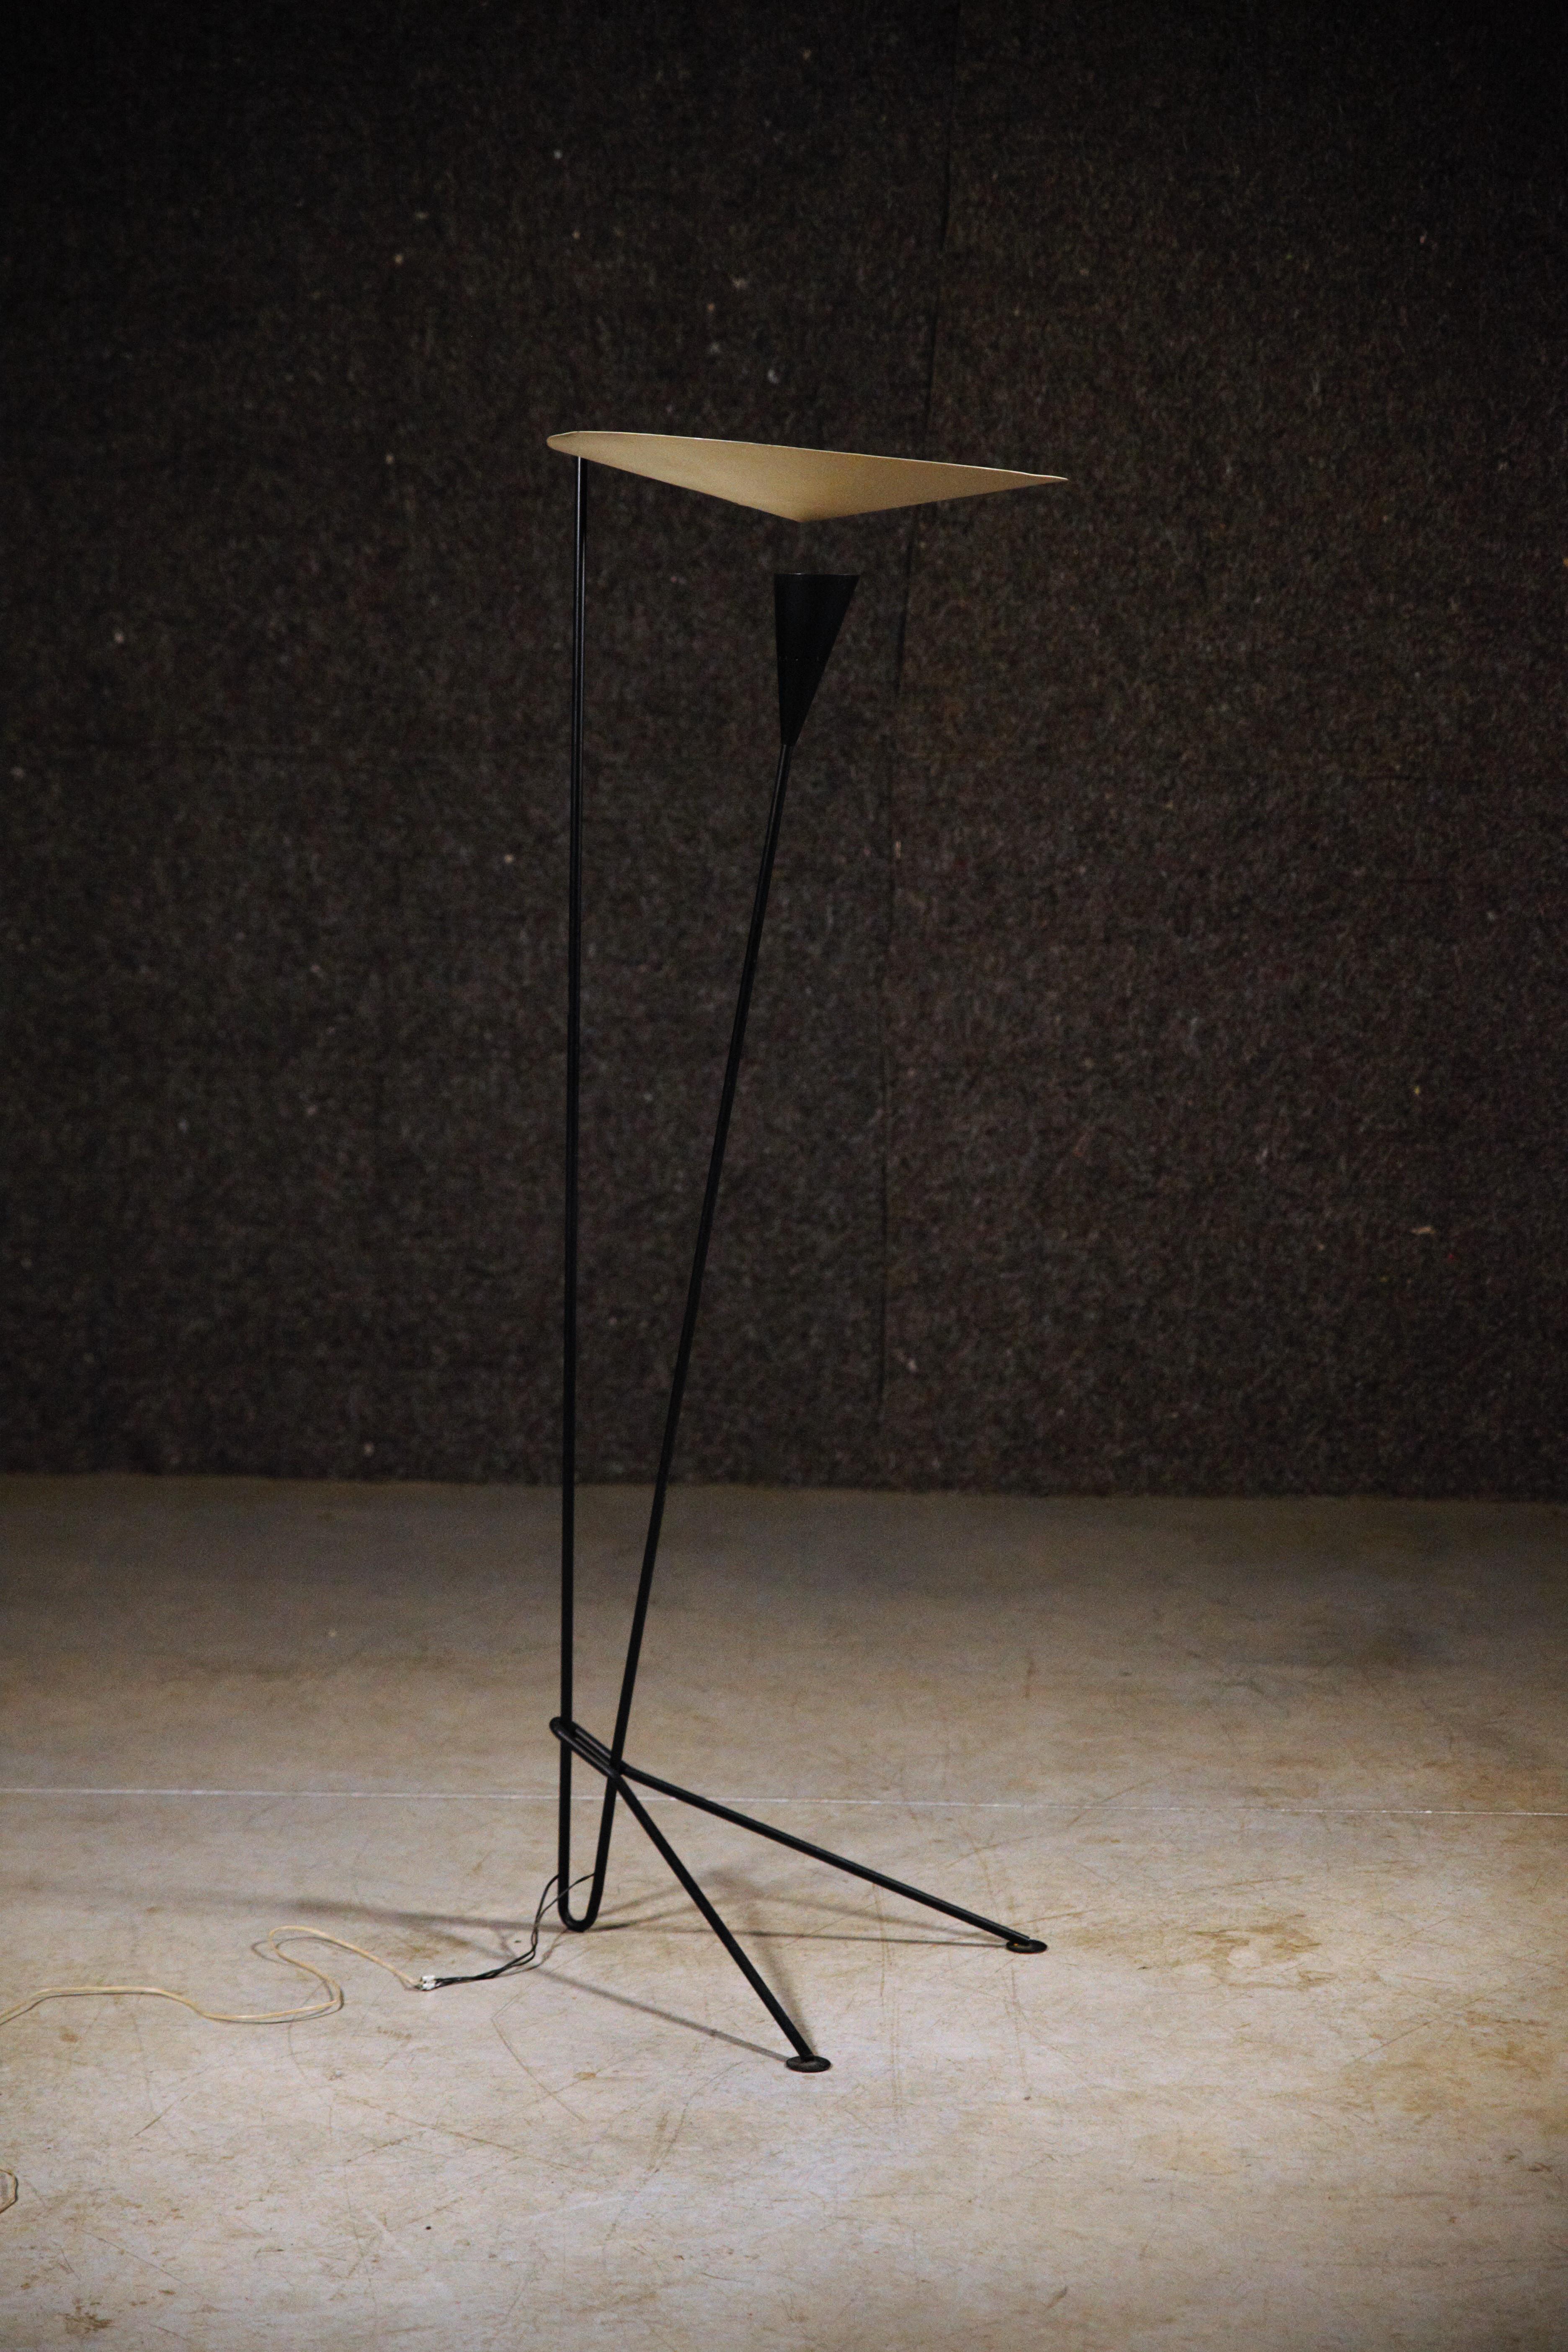 A rare floor lamp by Michel Buffet France 1950s

Atelier Mathieu

In original good condition

Original model from 1950s